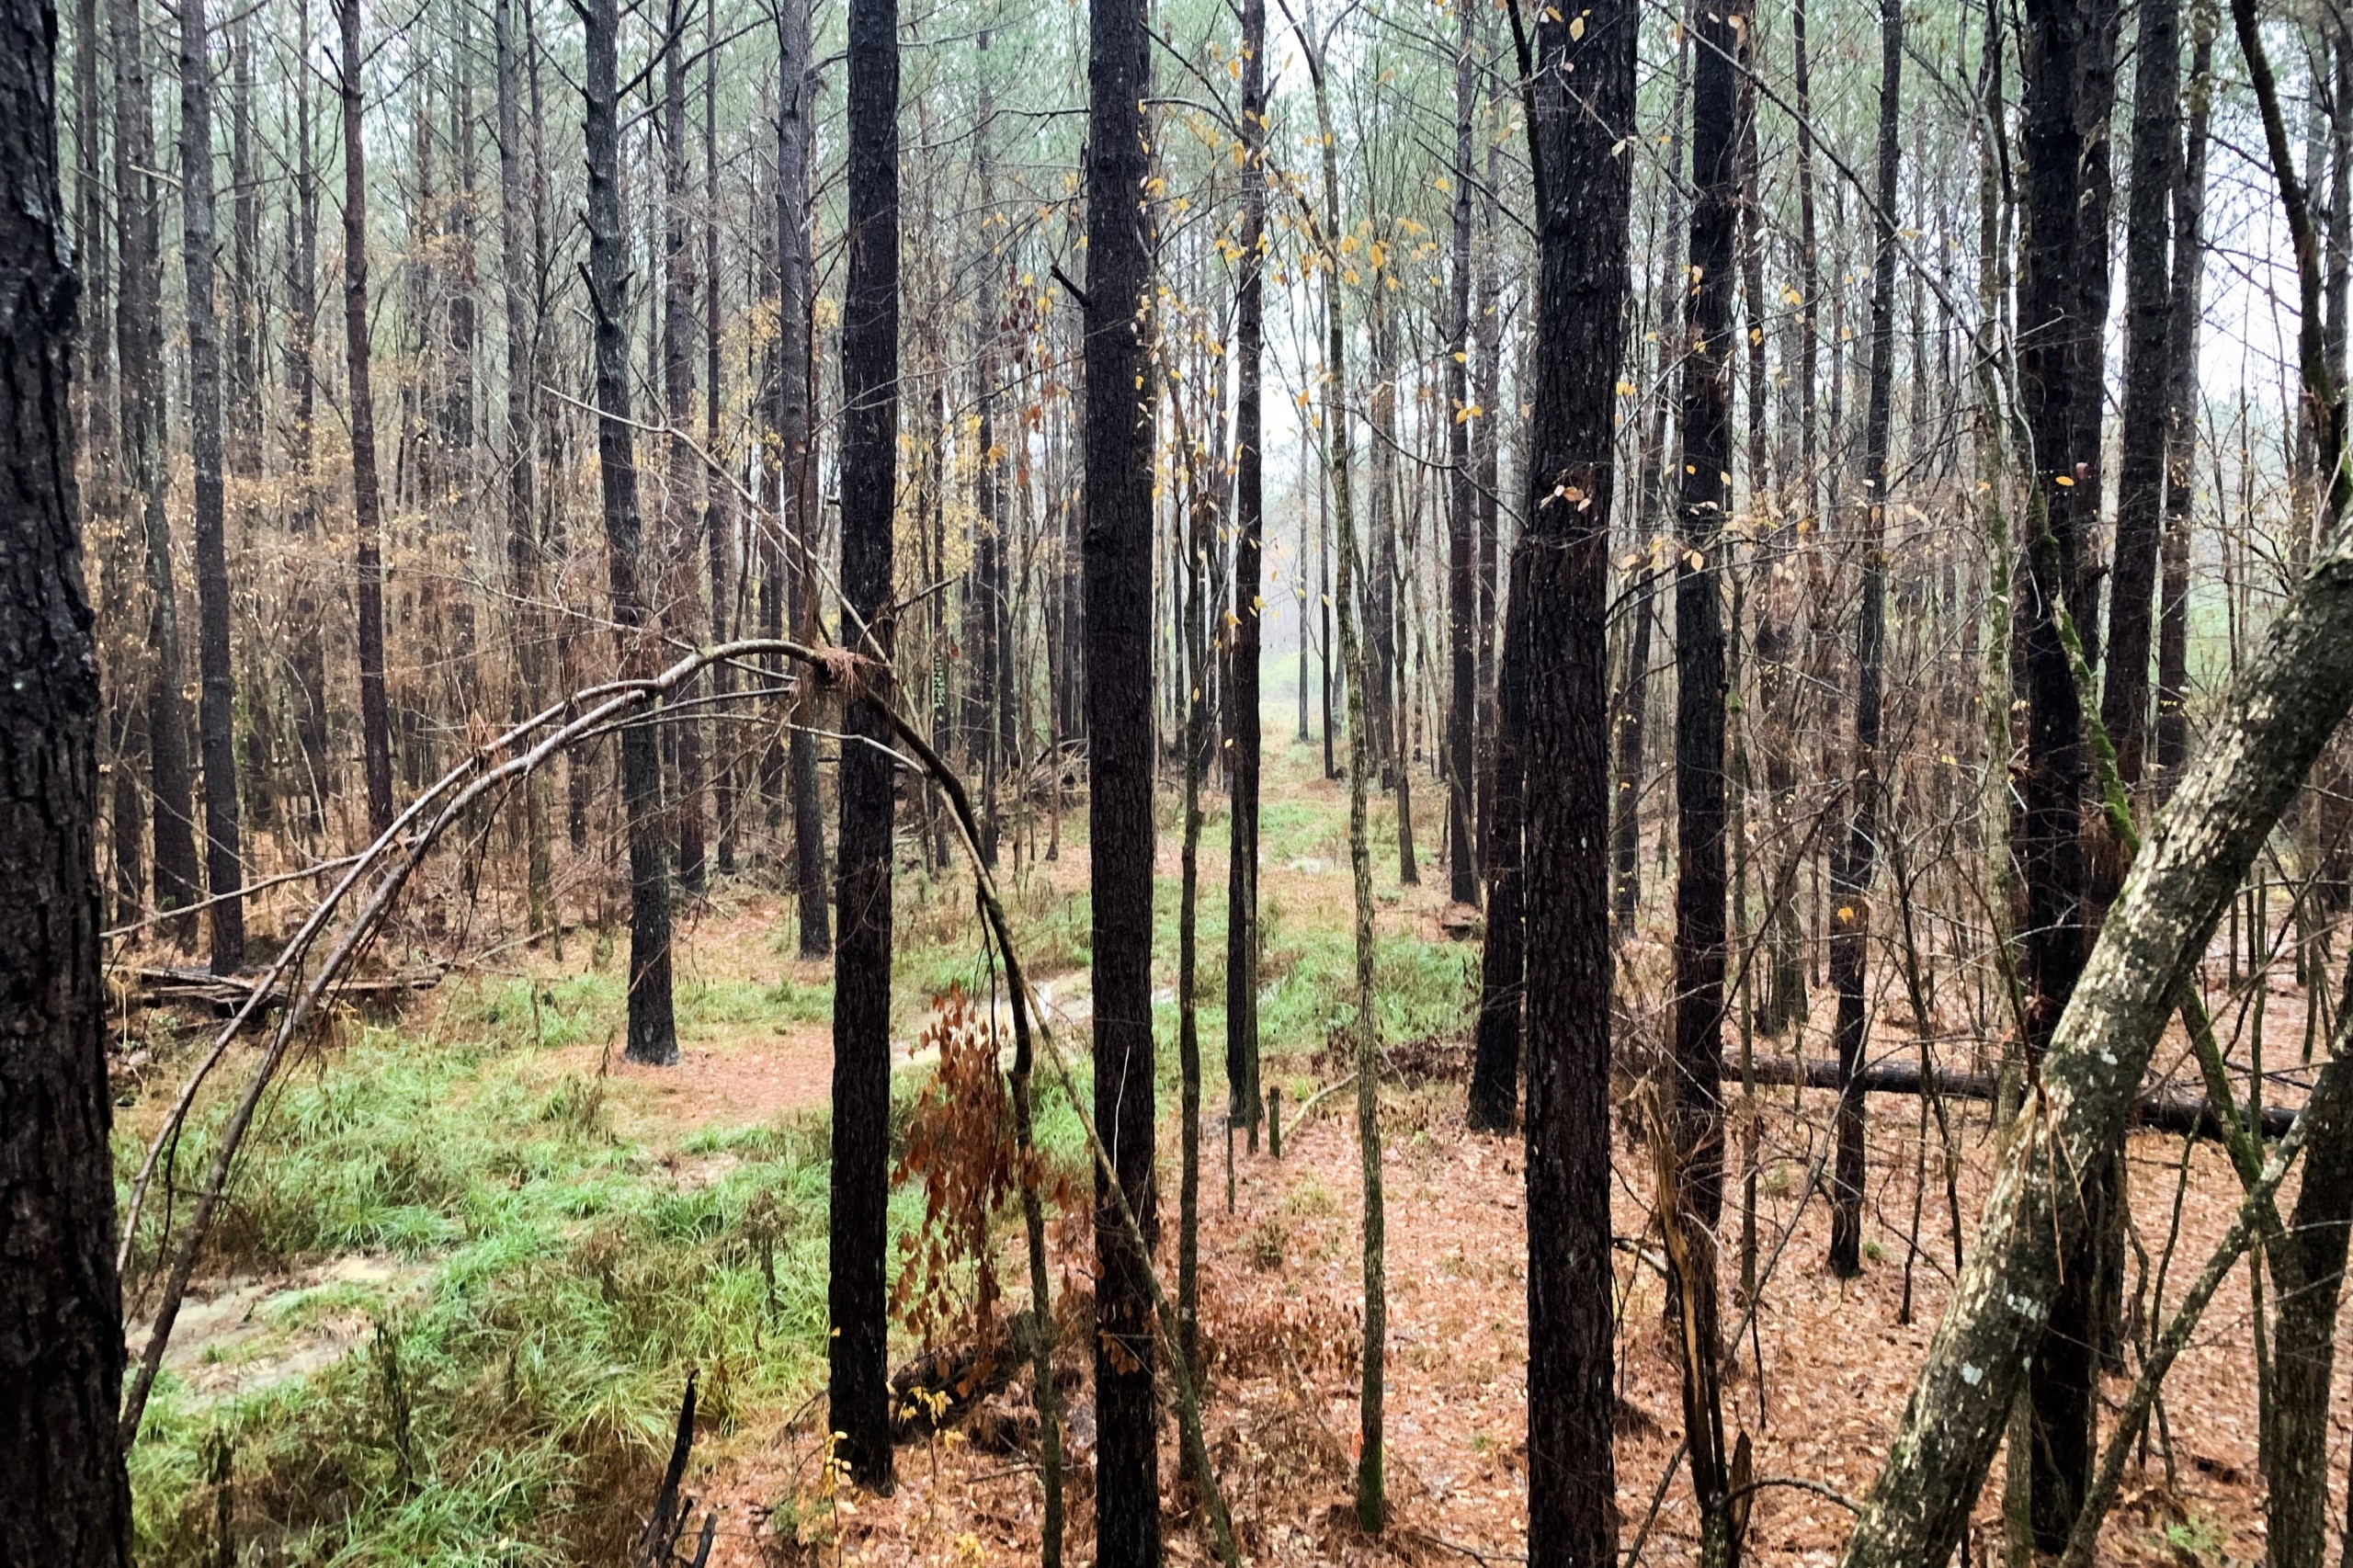 View from the stand: a trail through young pines